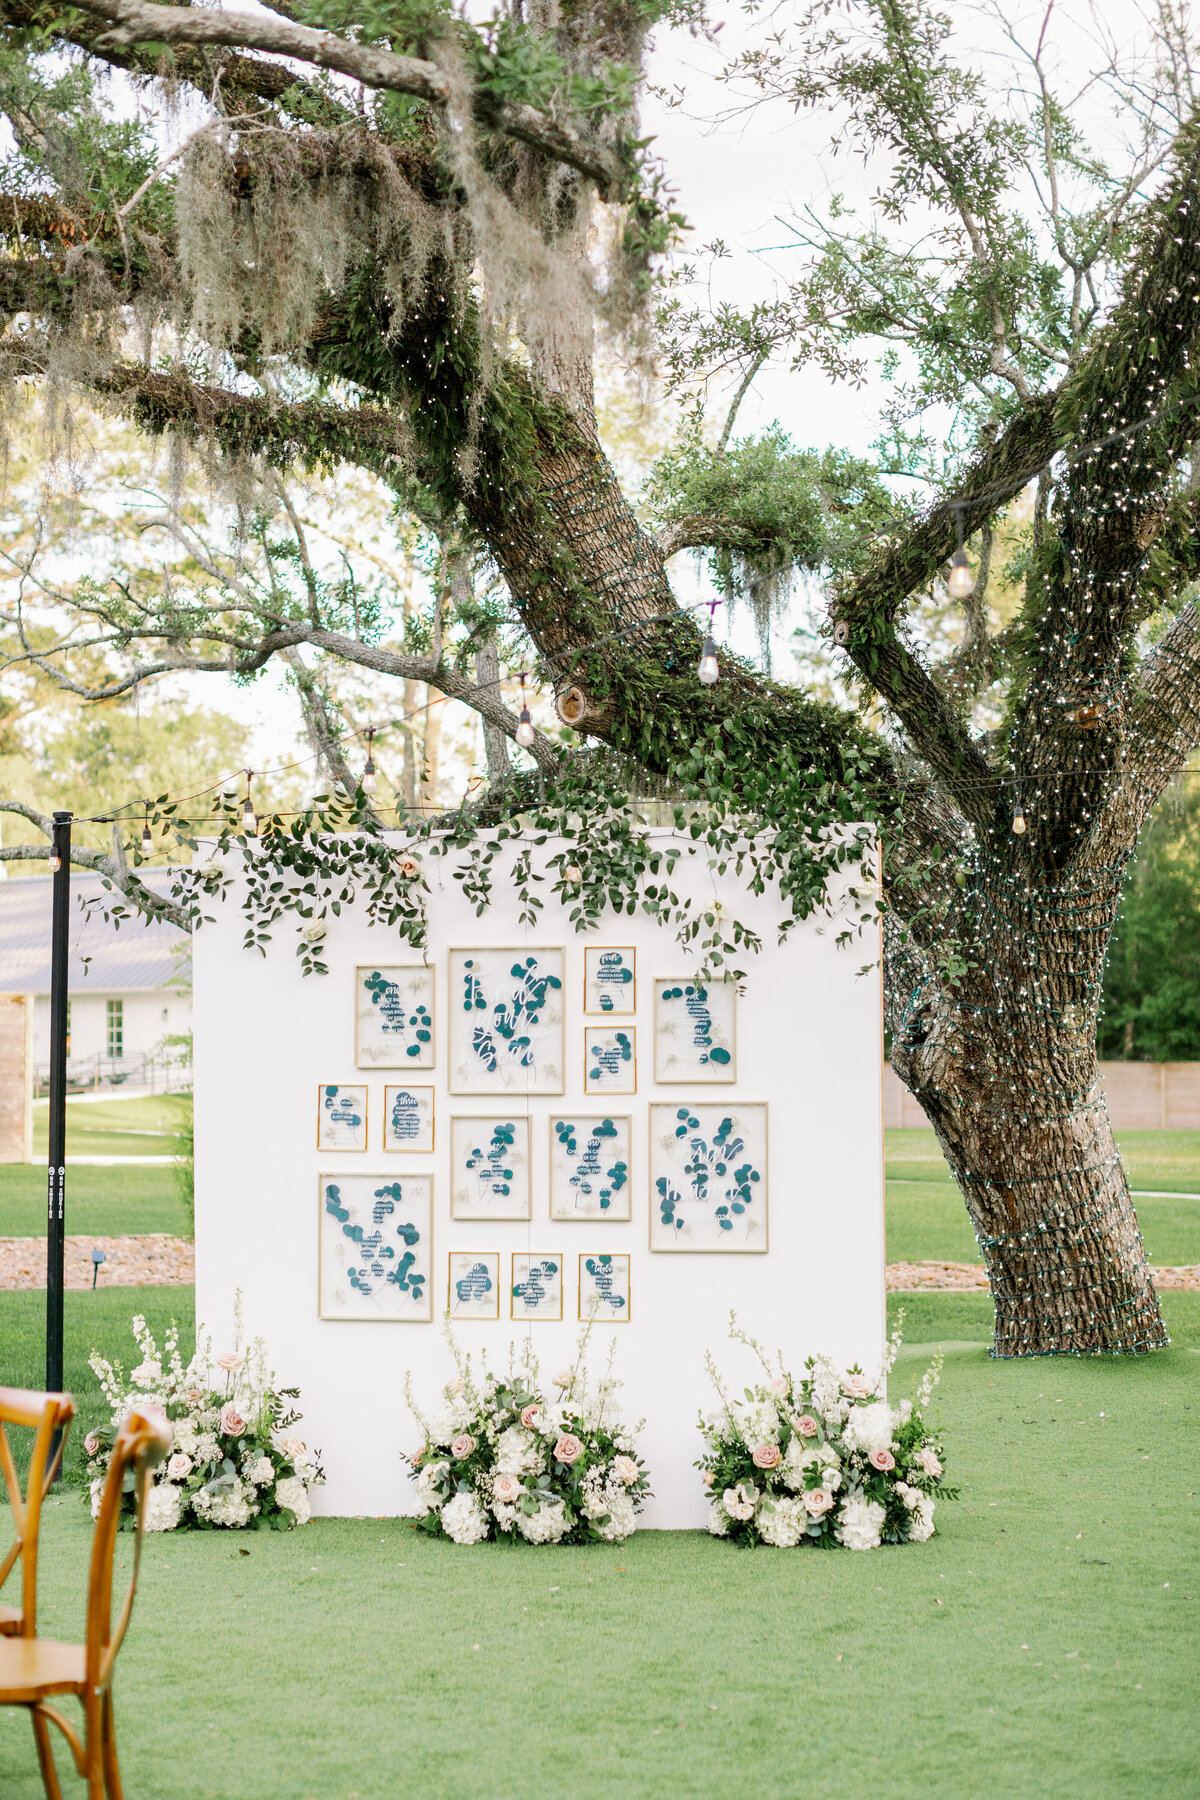 Elegant white and blue outdoor wedding backdrop decorated with white florals and greenery